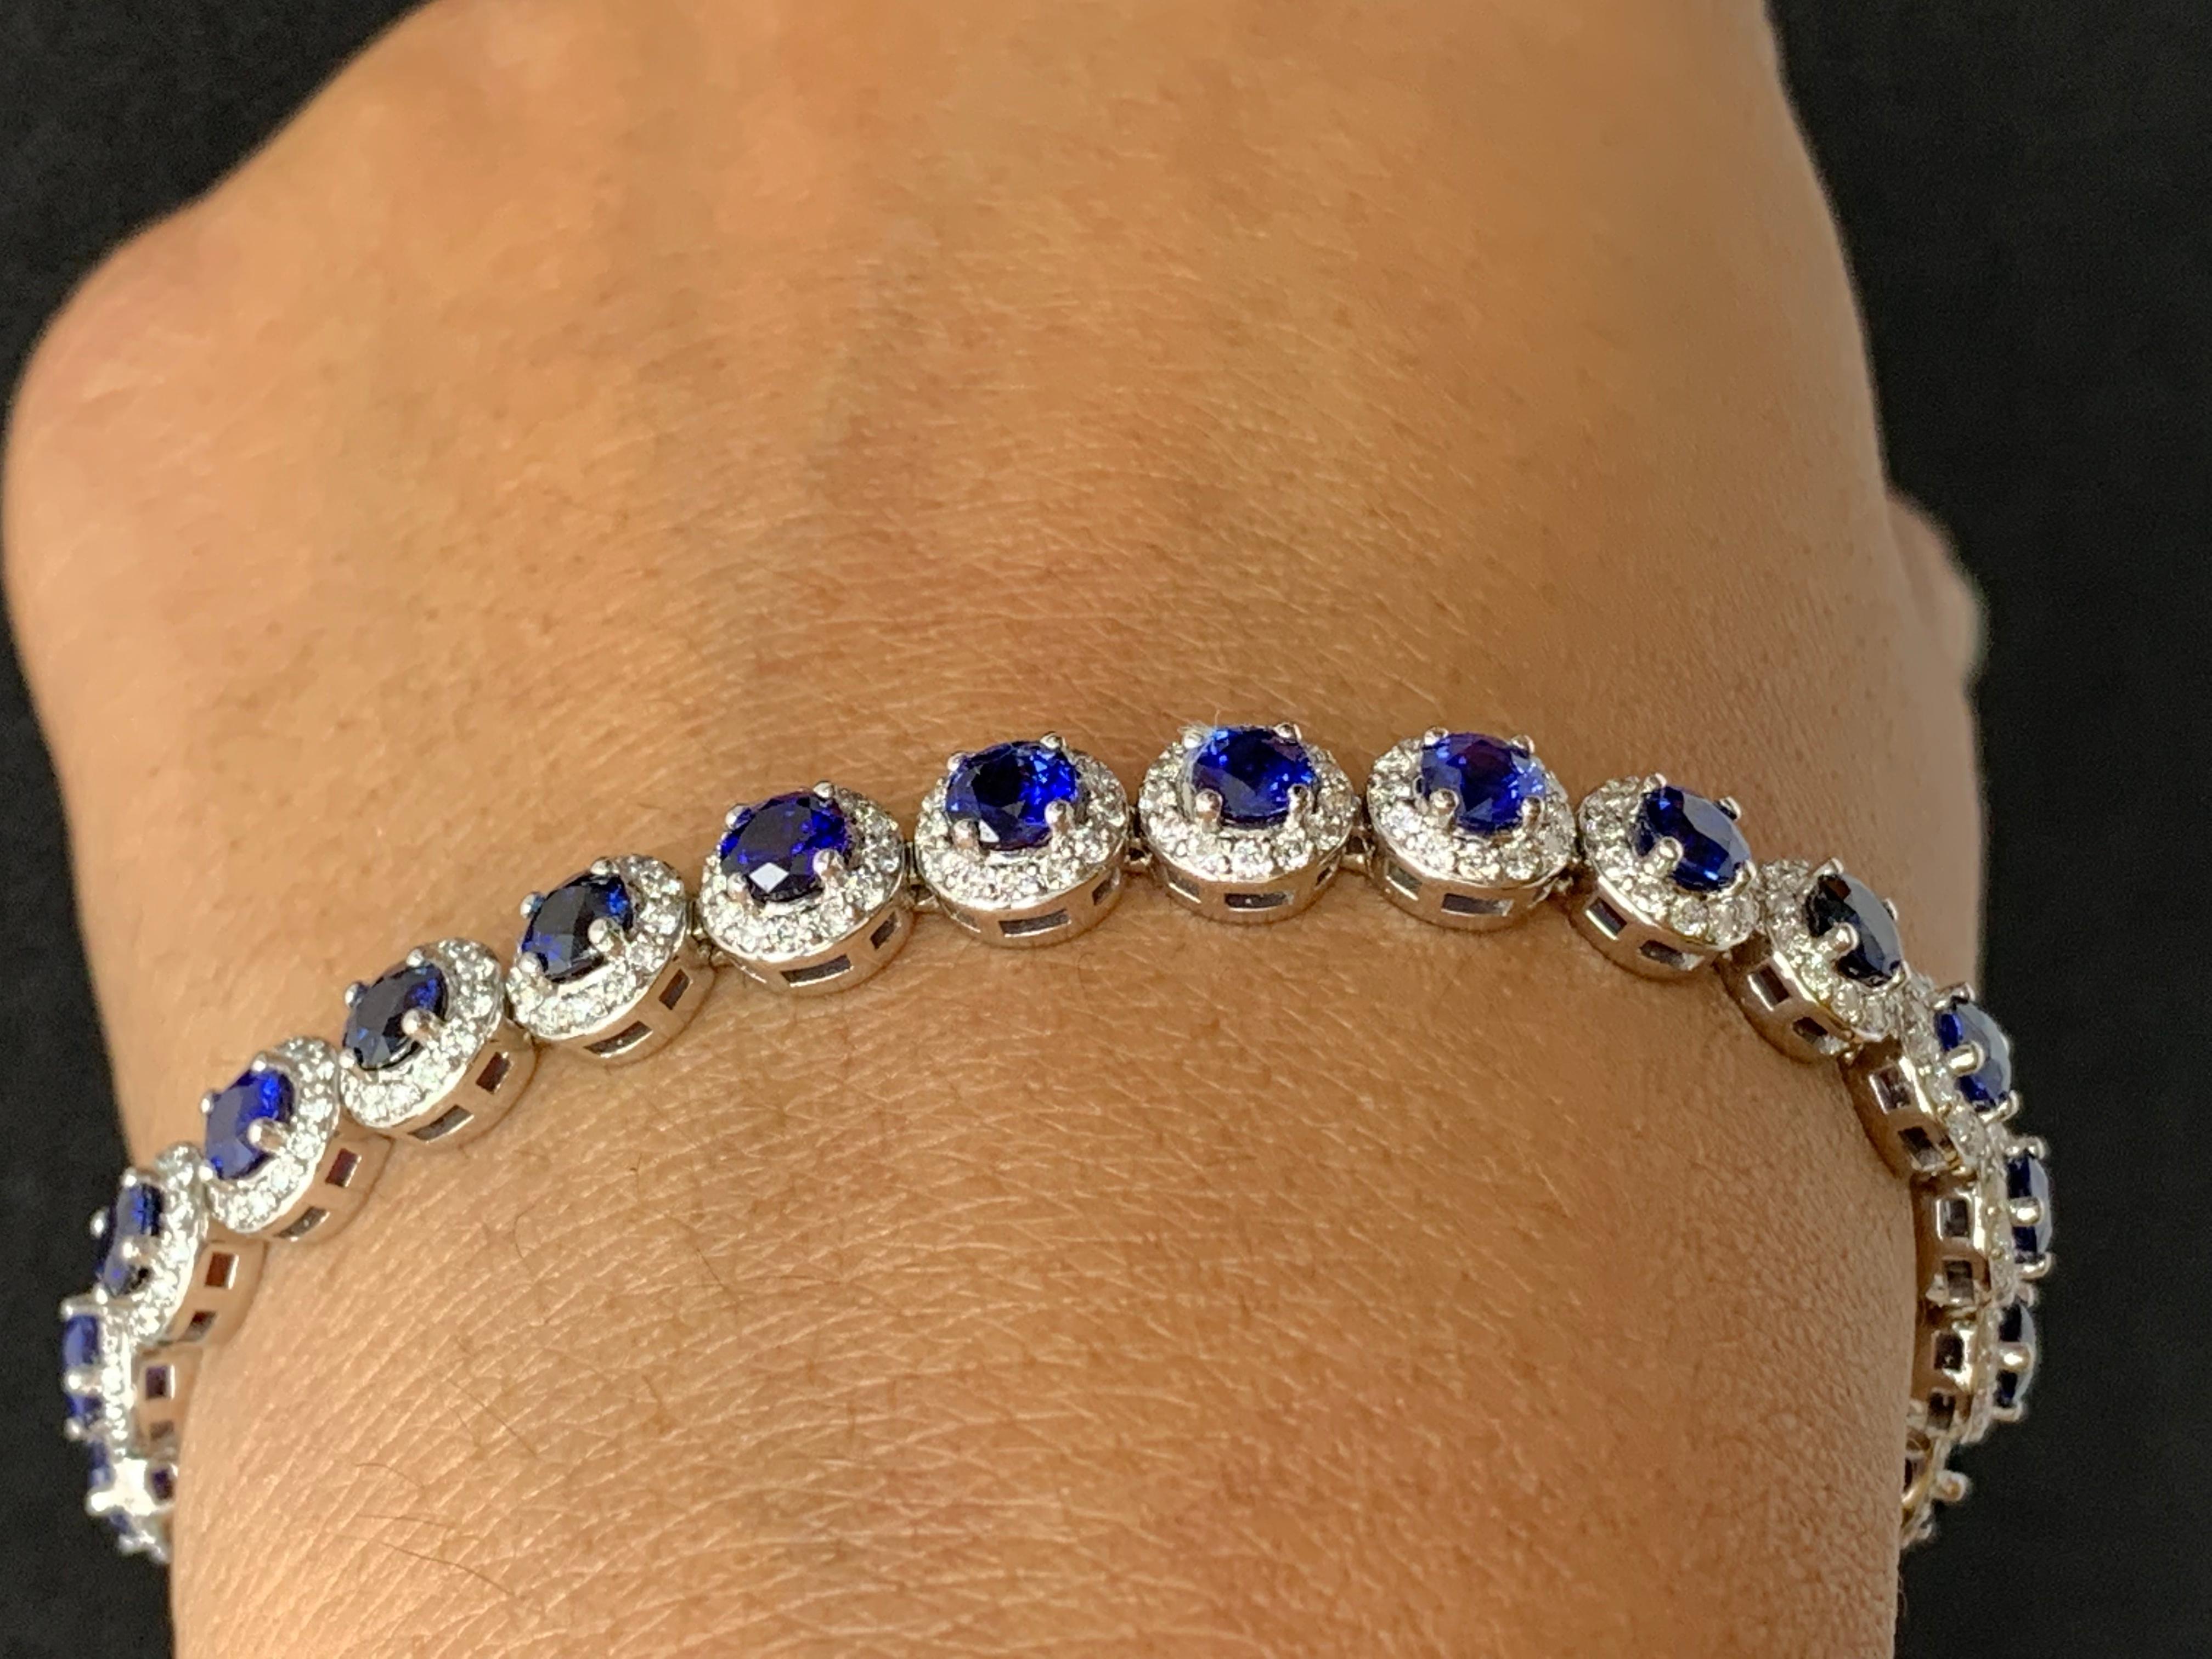 Contemporary 7.47 Carat Blue Sapphire and Diamond Halo Tennis Bracelet in 14k White Gold For Sale